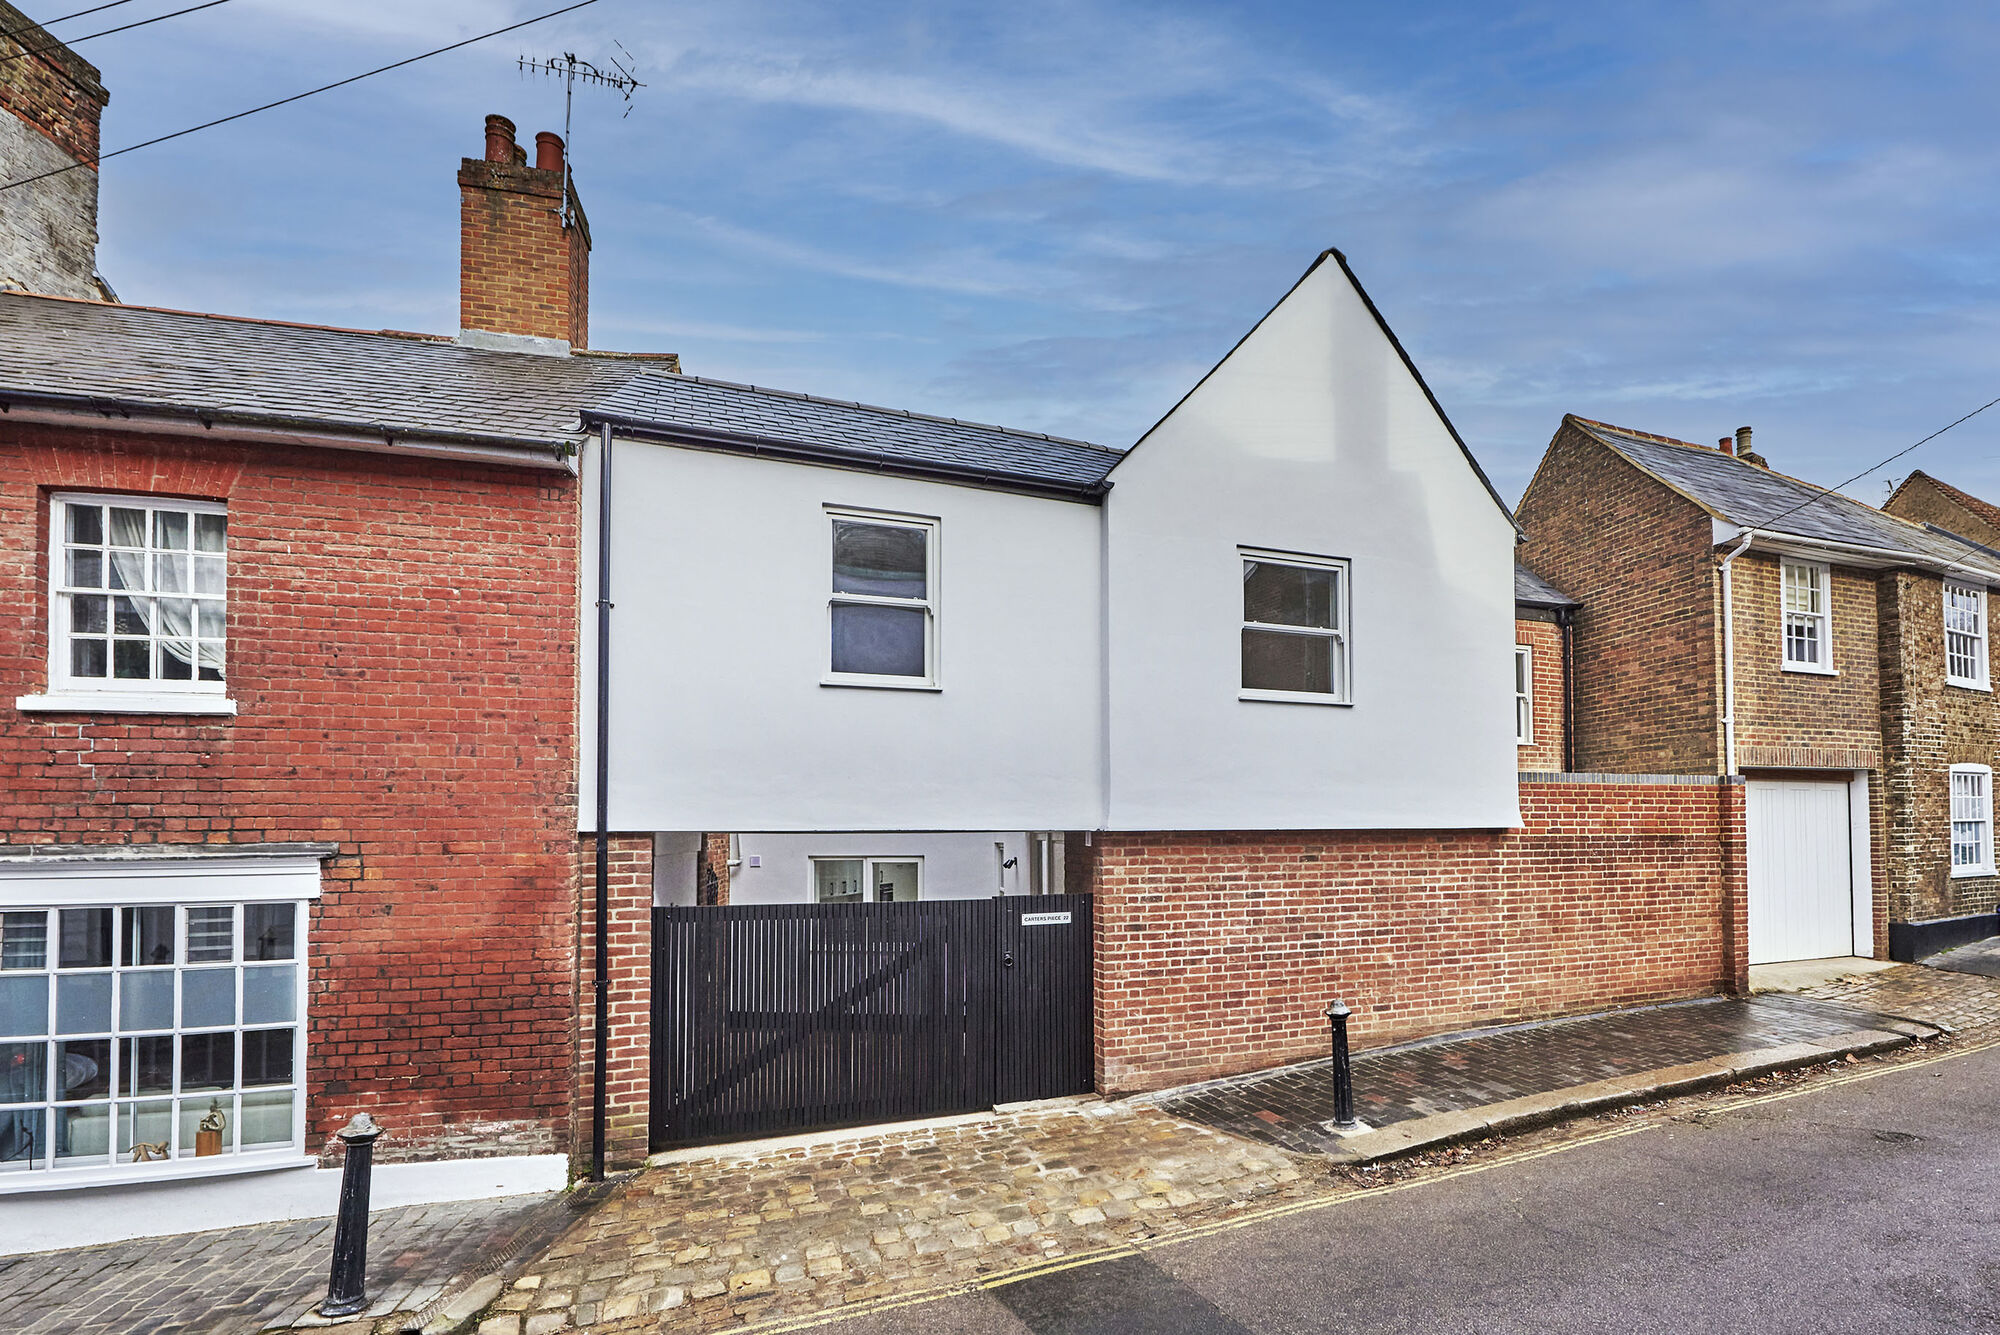 5 bedroom  house to rent, Available now Fishpool Street, St Albans, AL3, main image